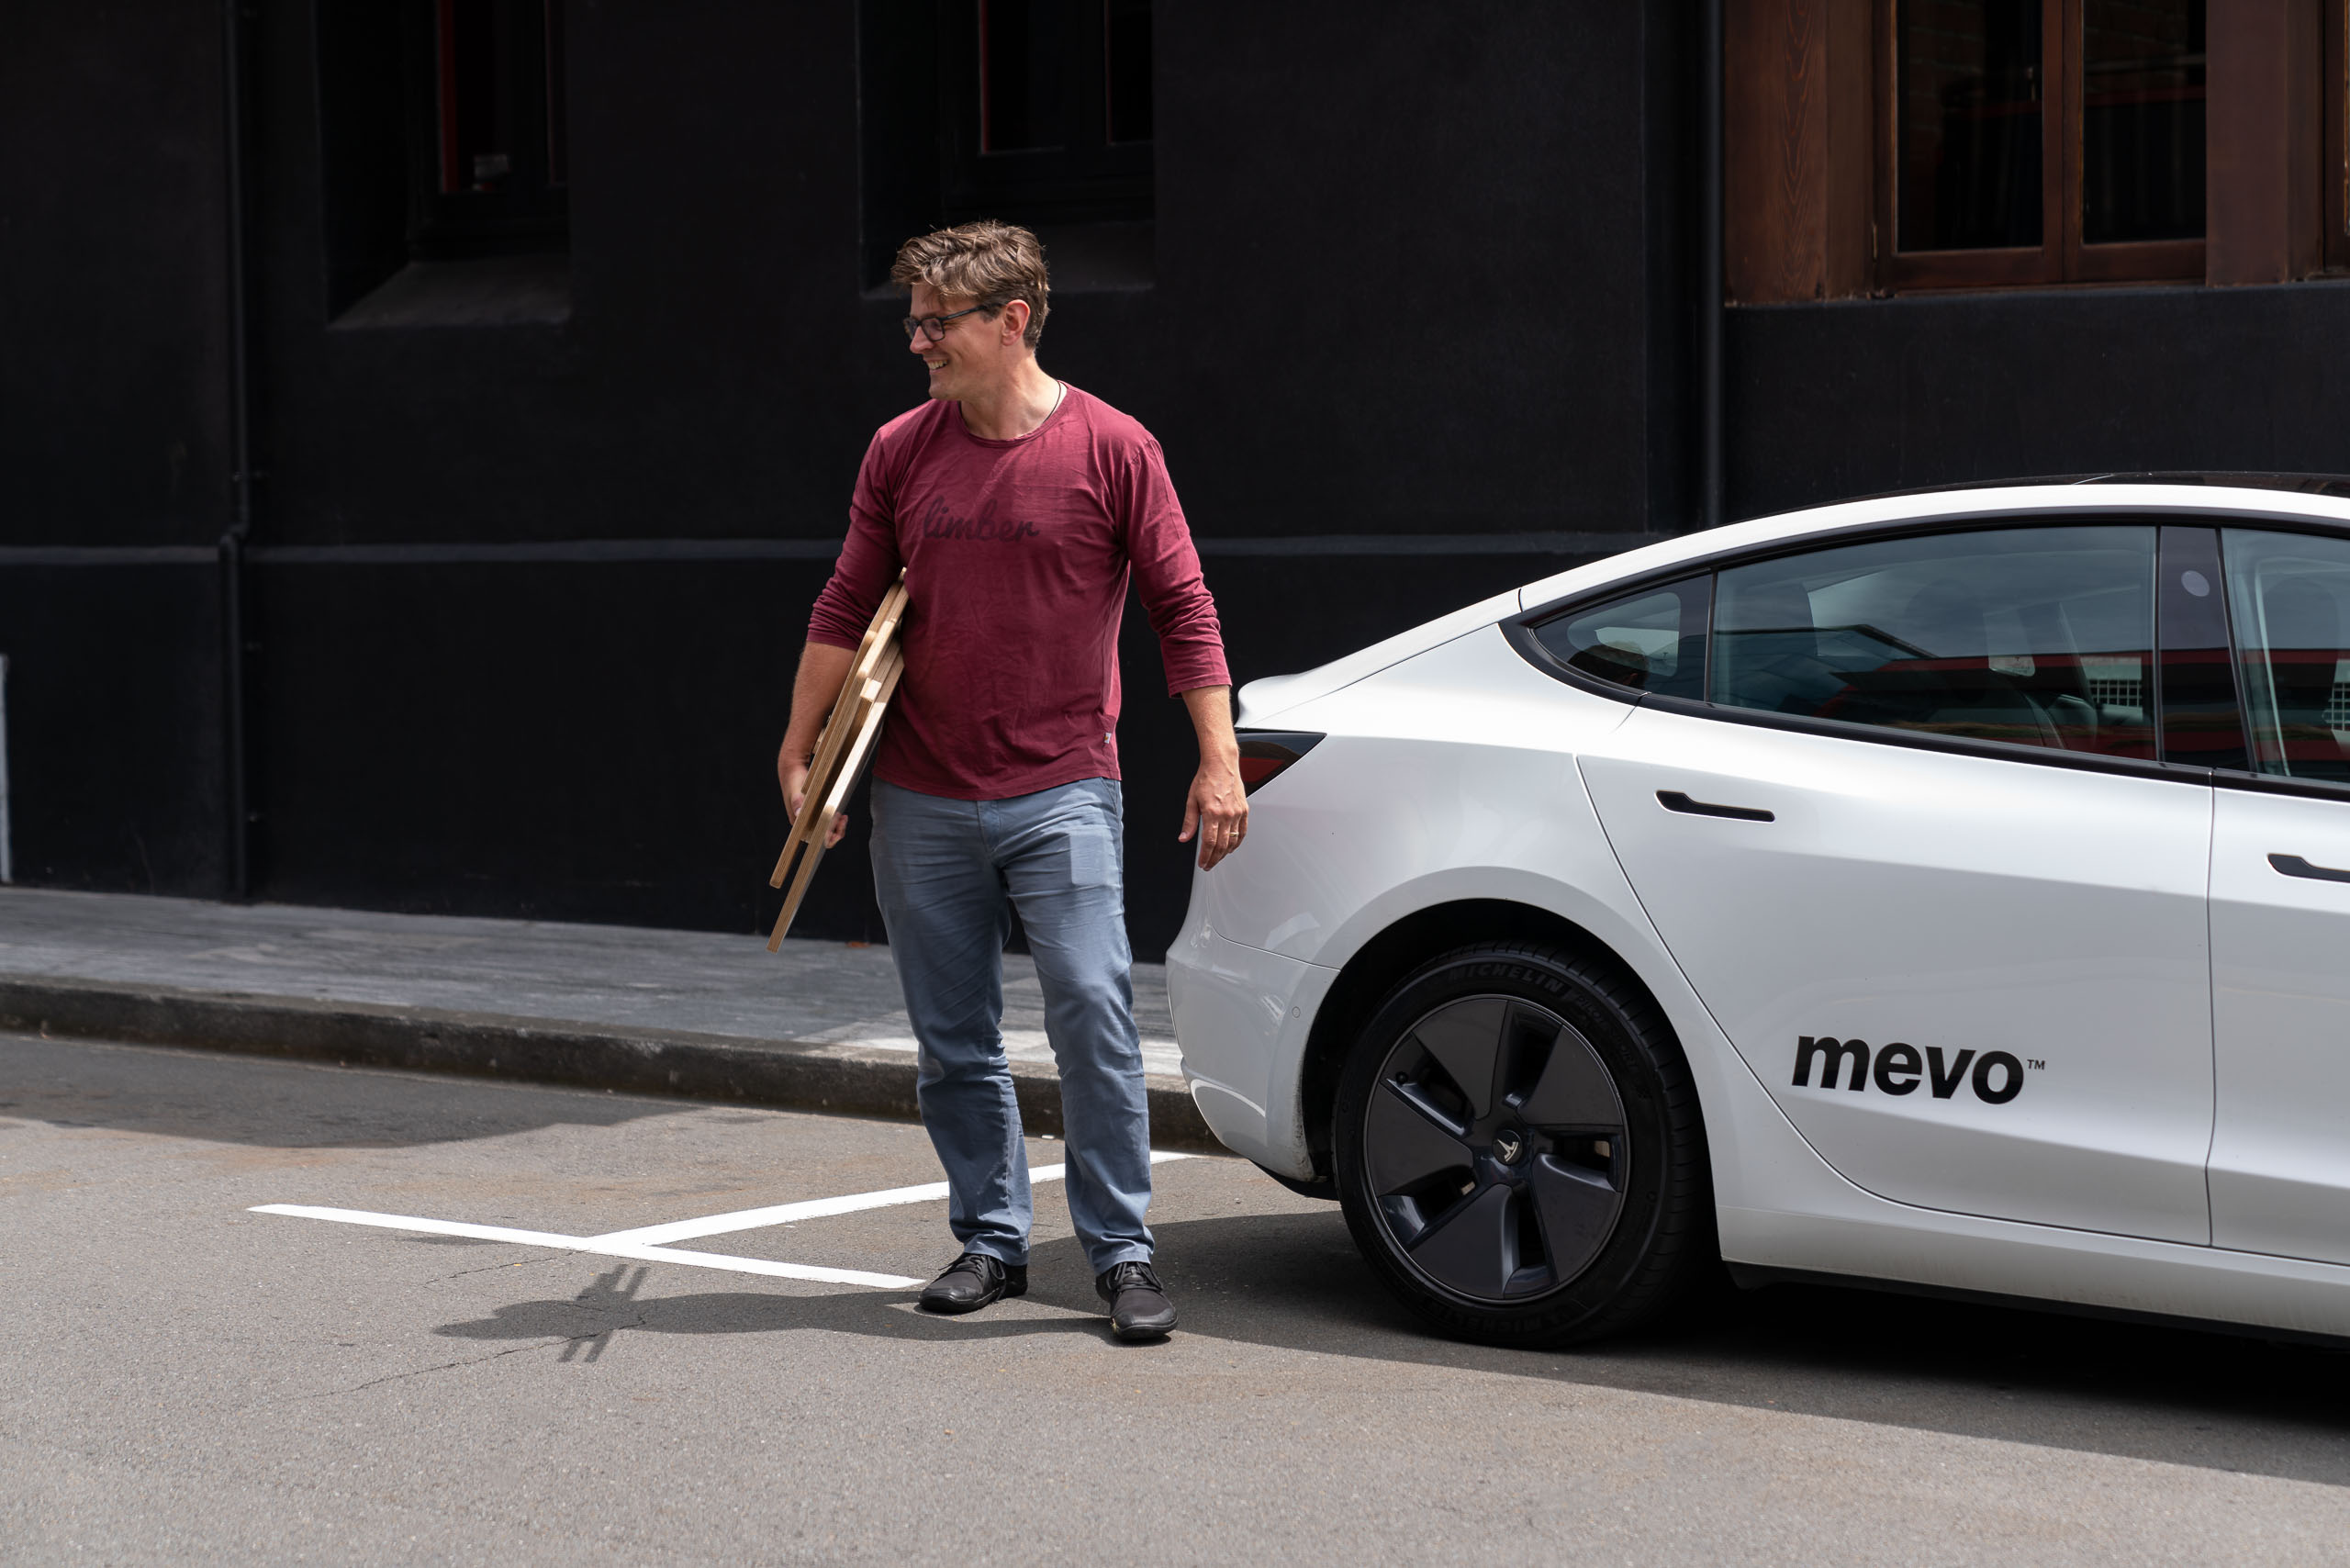 Bart standing next to a Mevo vehicle on the Wellington streets. He is holding a Limber Mini desk, folded up.